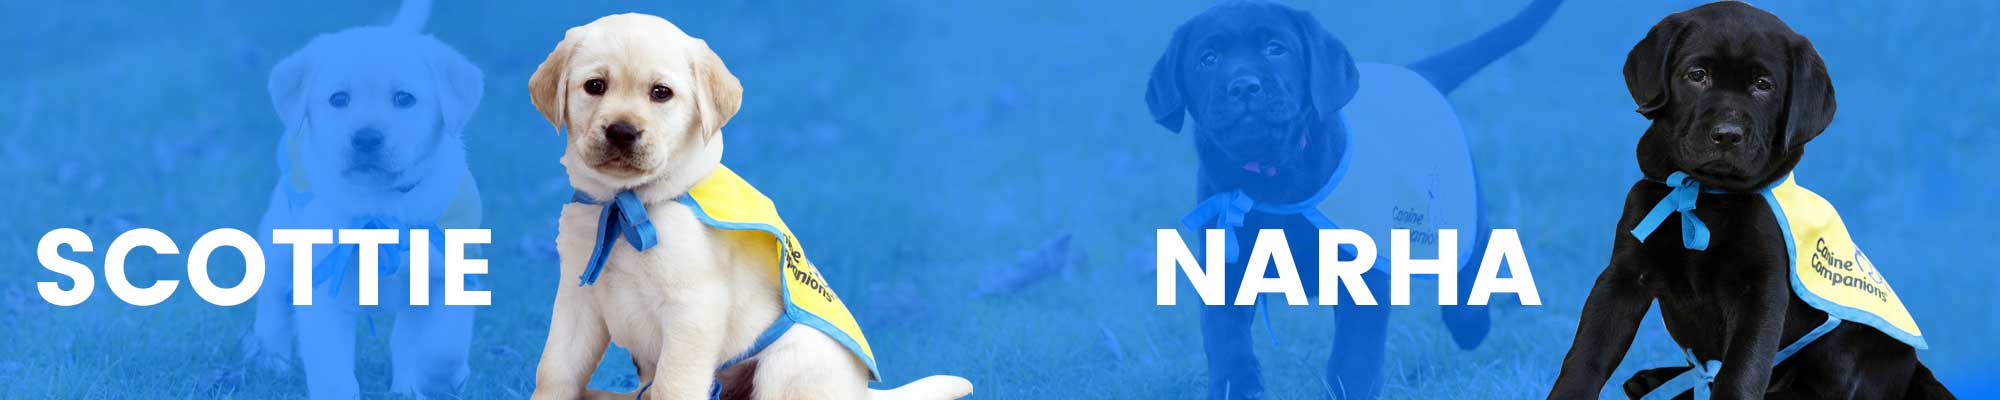 Blue header image with a black and yellow lab puppy in yellow puppy capes and their names Scottie and Narha